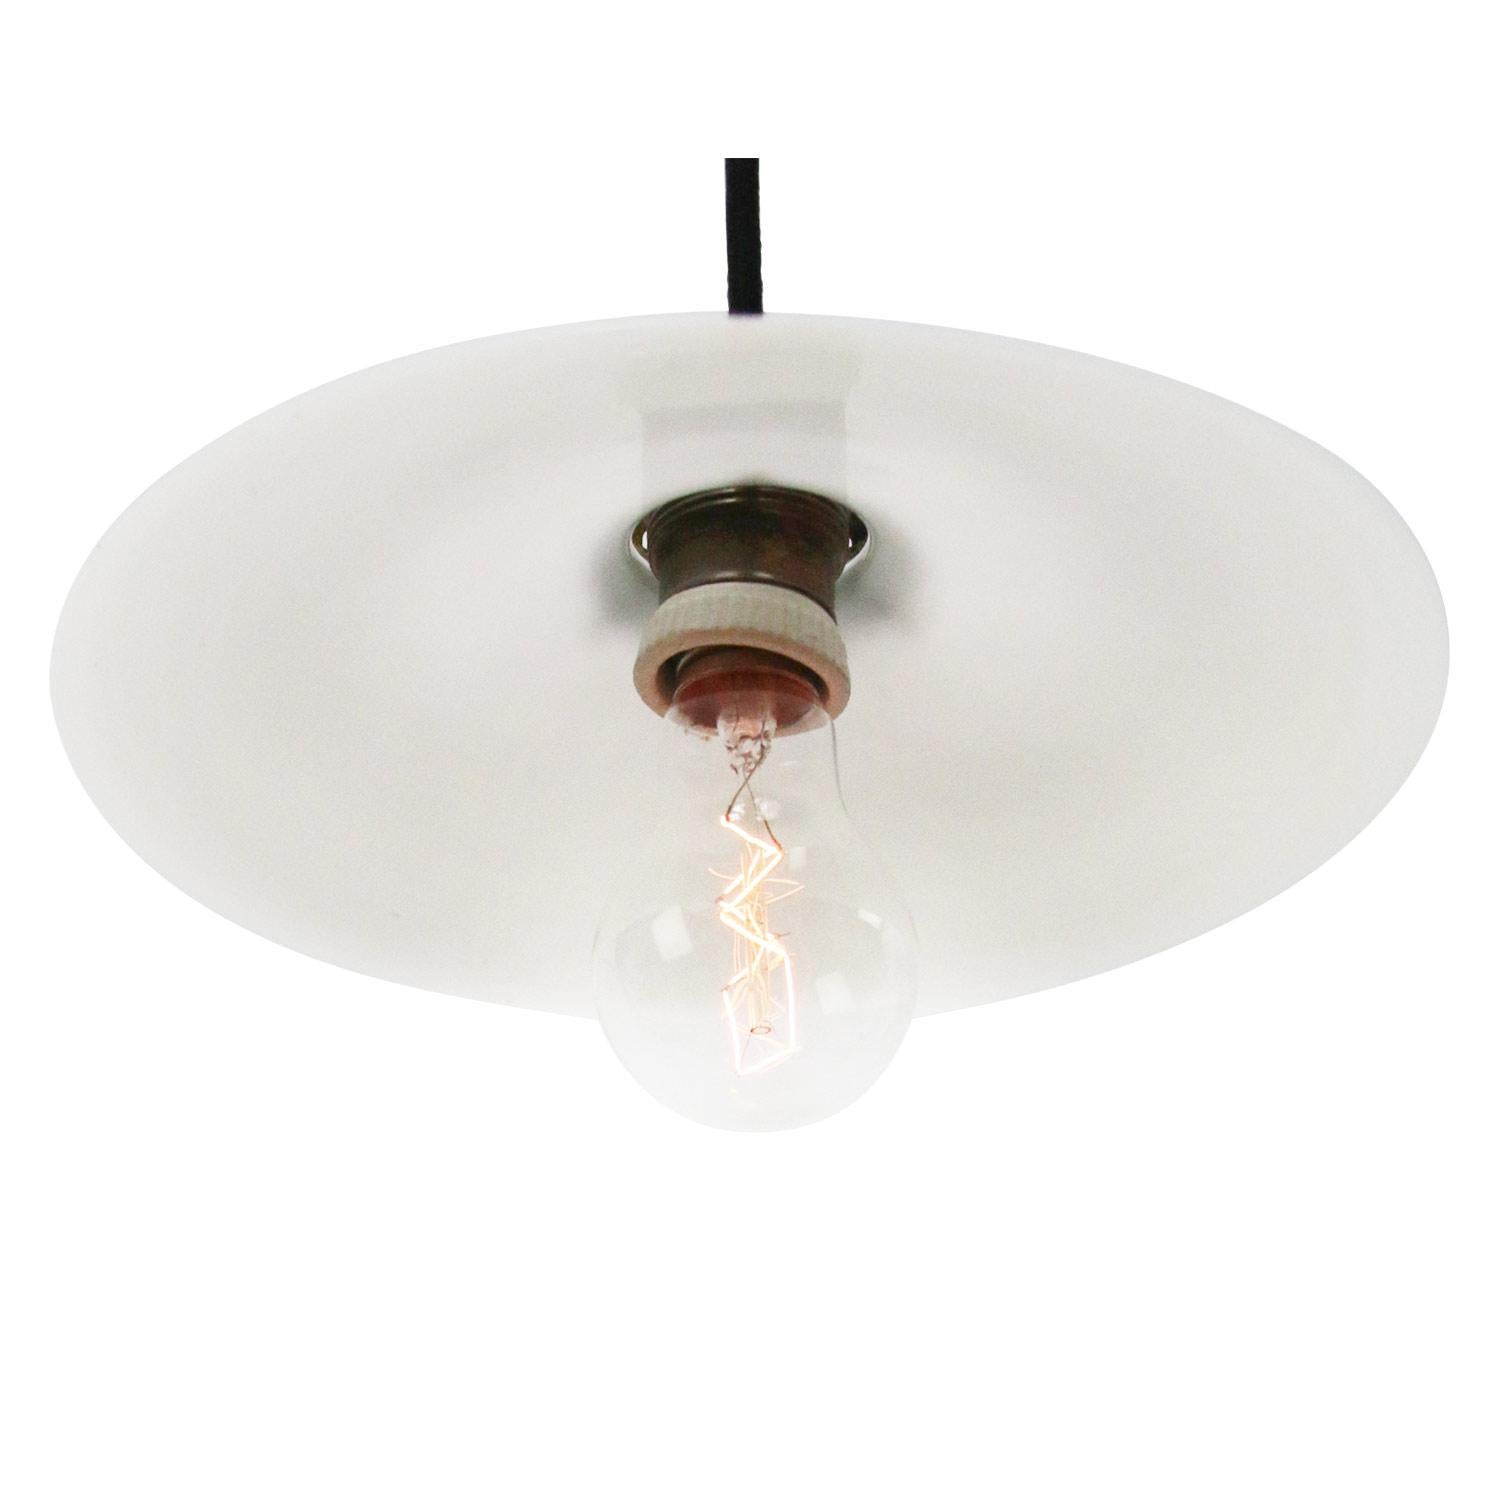 French opaline glass Industrial pendant.

Weight: 1.00 kg / 2.2 lb

Priced per individual item. All lamps have been made suitable by international standards for incandescent light bulbs, energy-efficient and LED bulbs. E26/E27 bulb holder. The